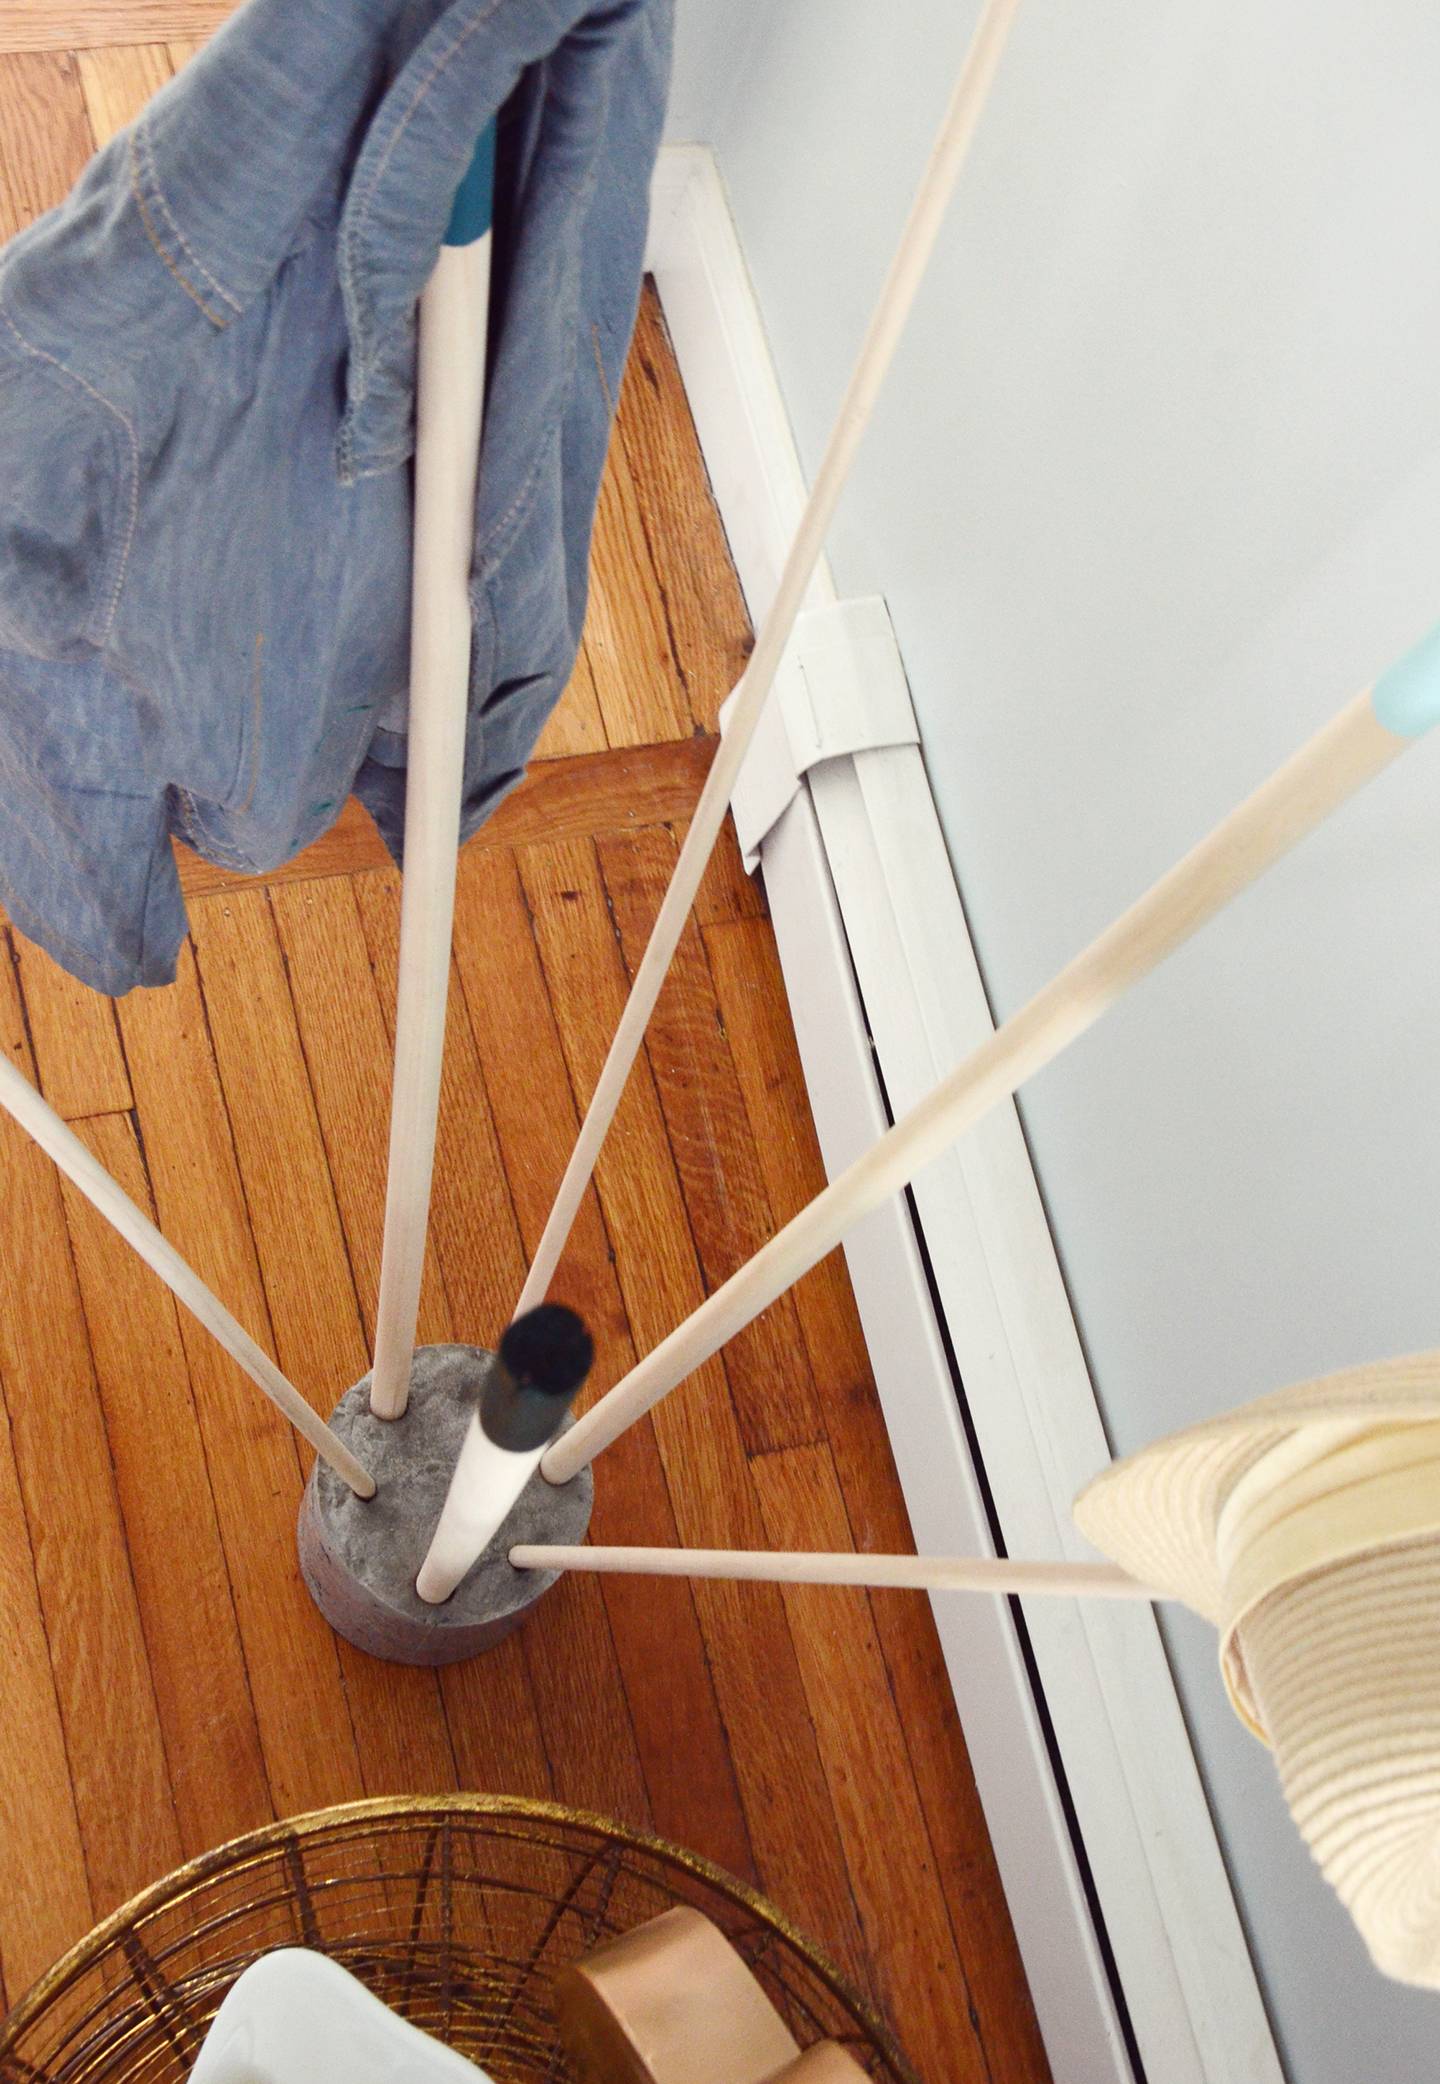 DIY coat rack made from cement and wooden dowels